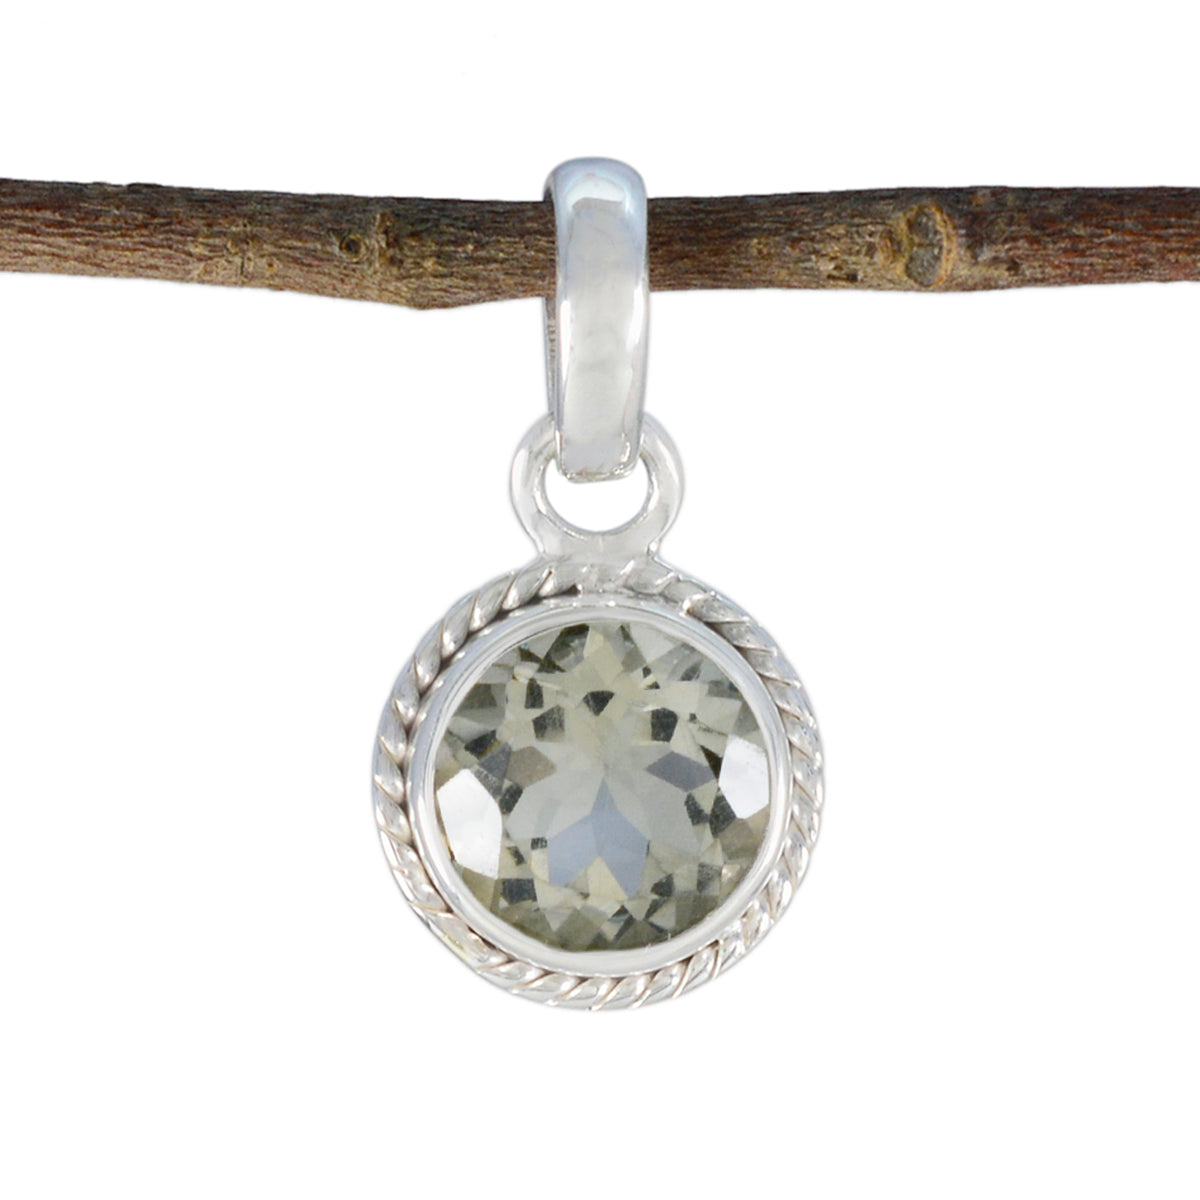 Riyo Lovely Gems Round Faceted Green Green Amethyst Solid Silver Pendant Gift For Easter Sunday